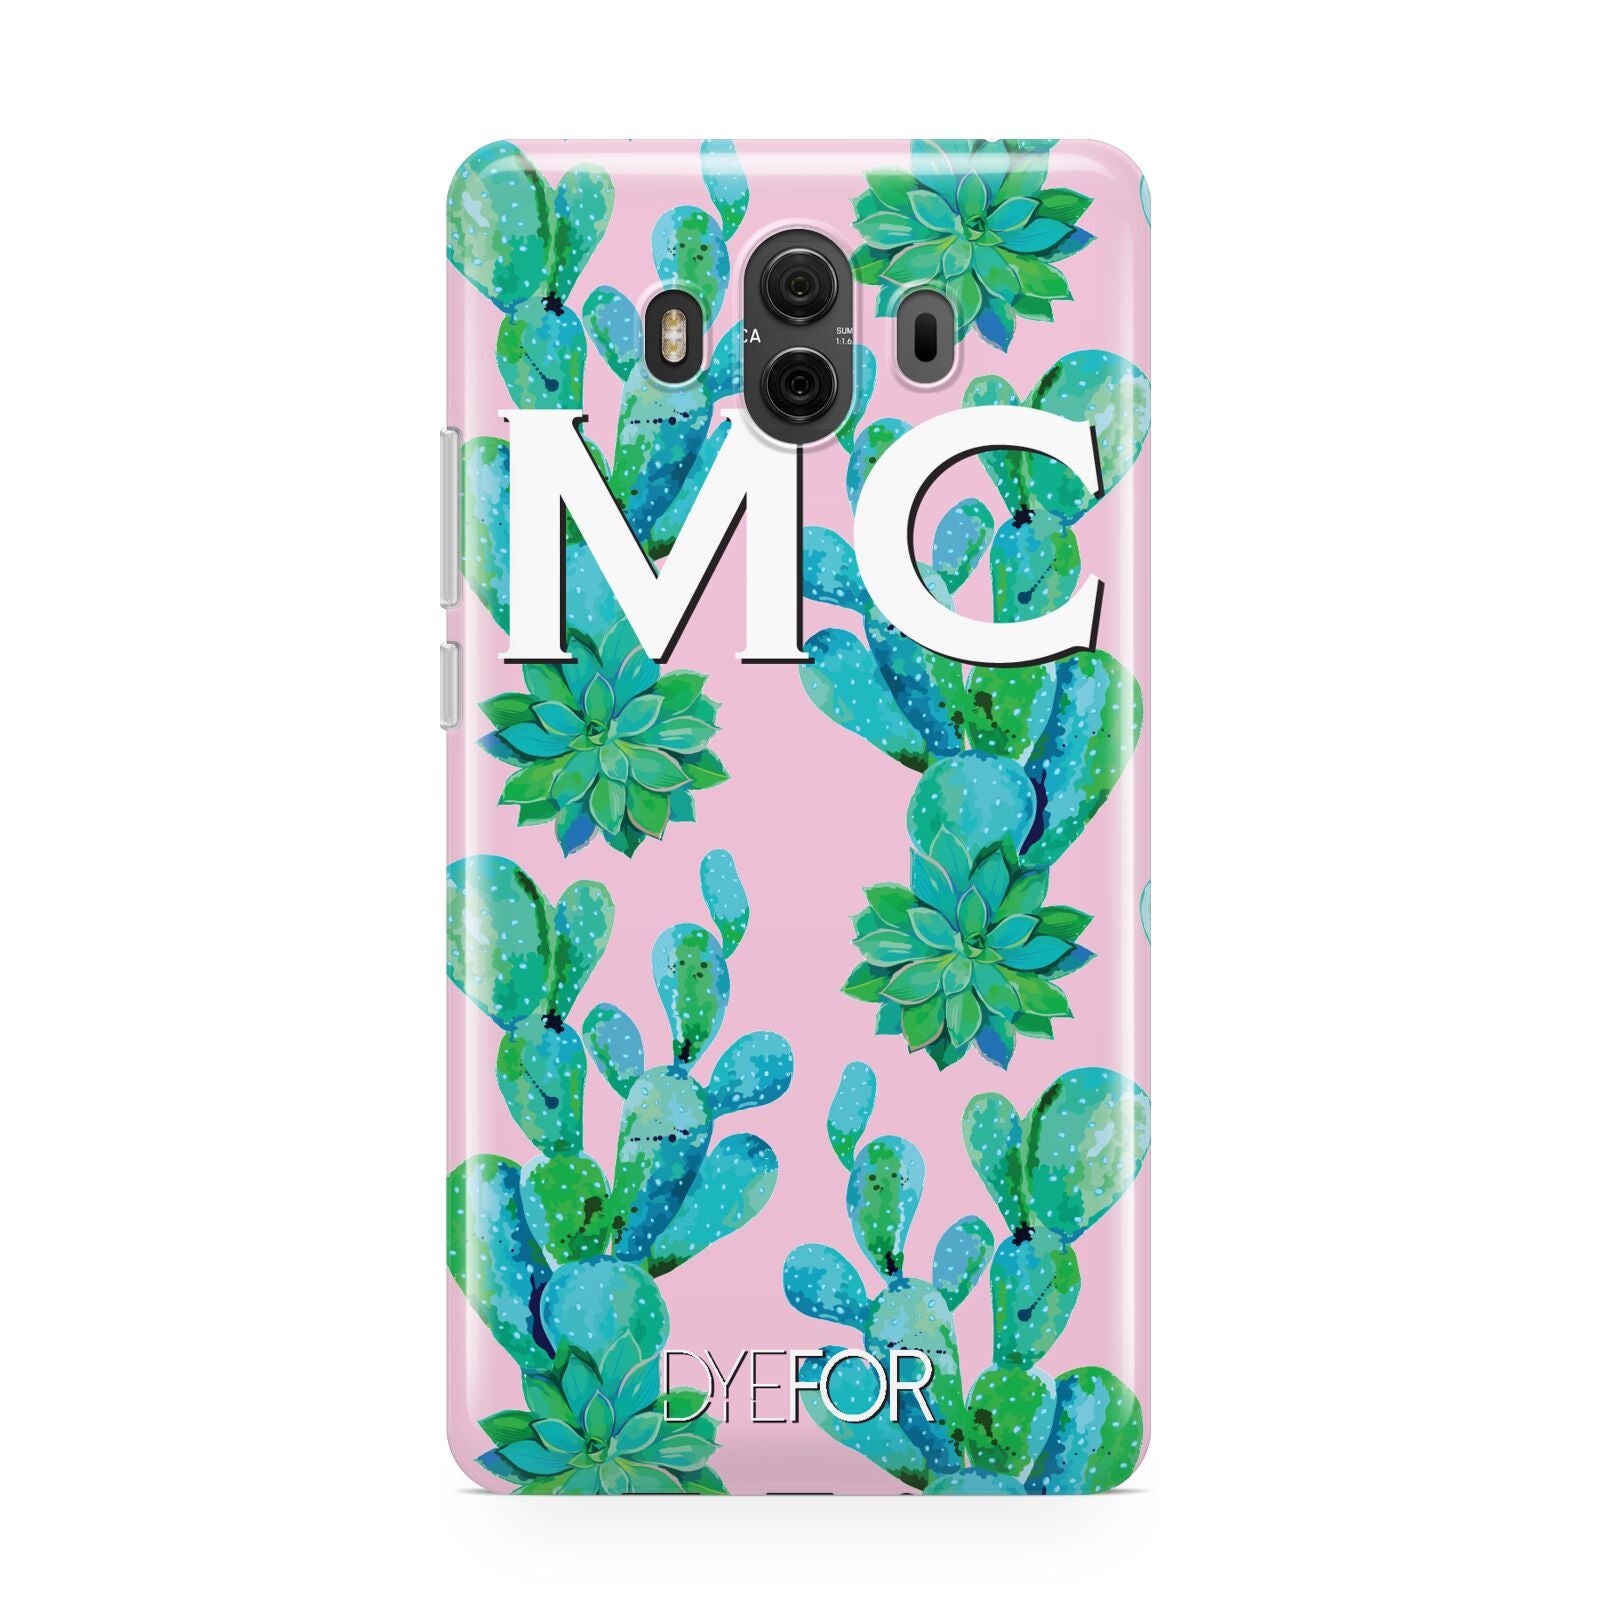 Personalised Tropical Pink Cactus Huawei Mate 10 Protective Phone Case